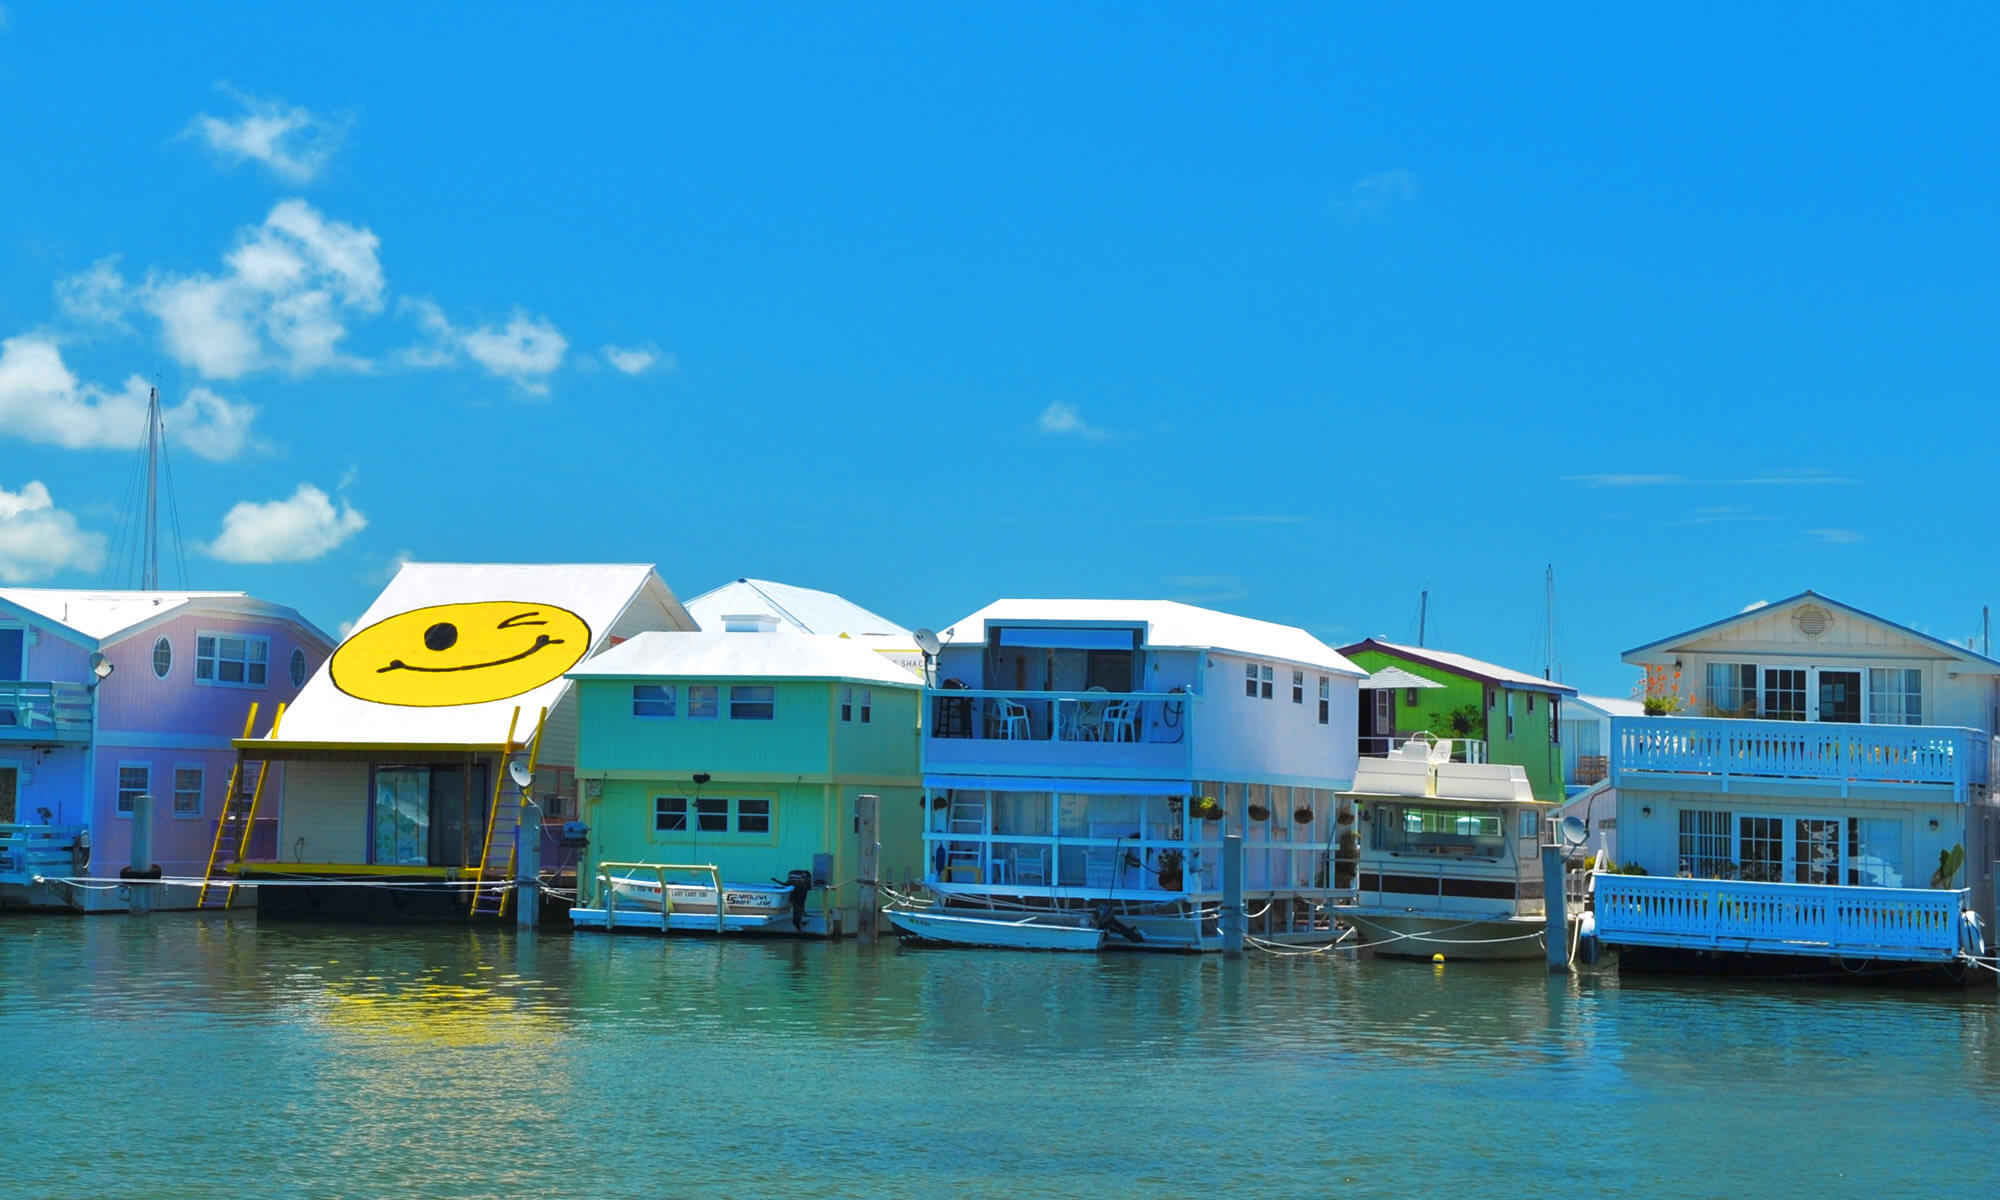 A row of house boats on the water and one of them has a large yellow winking face painted on the roof in Key West, FL